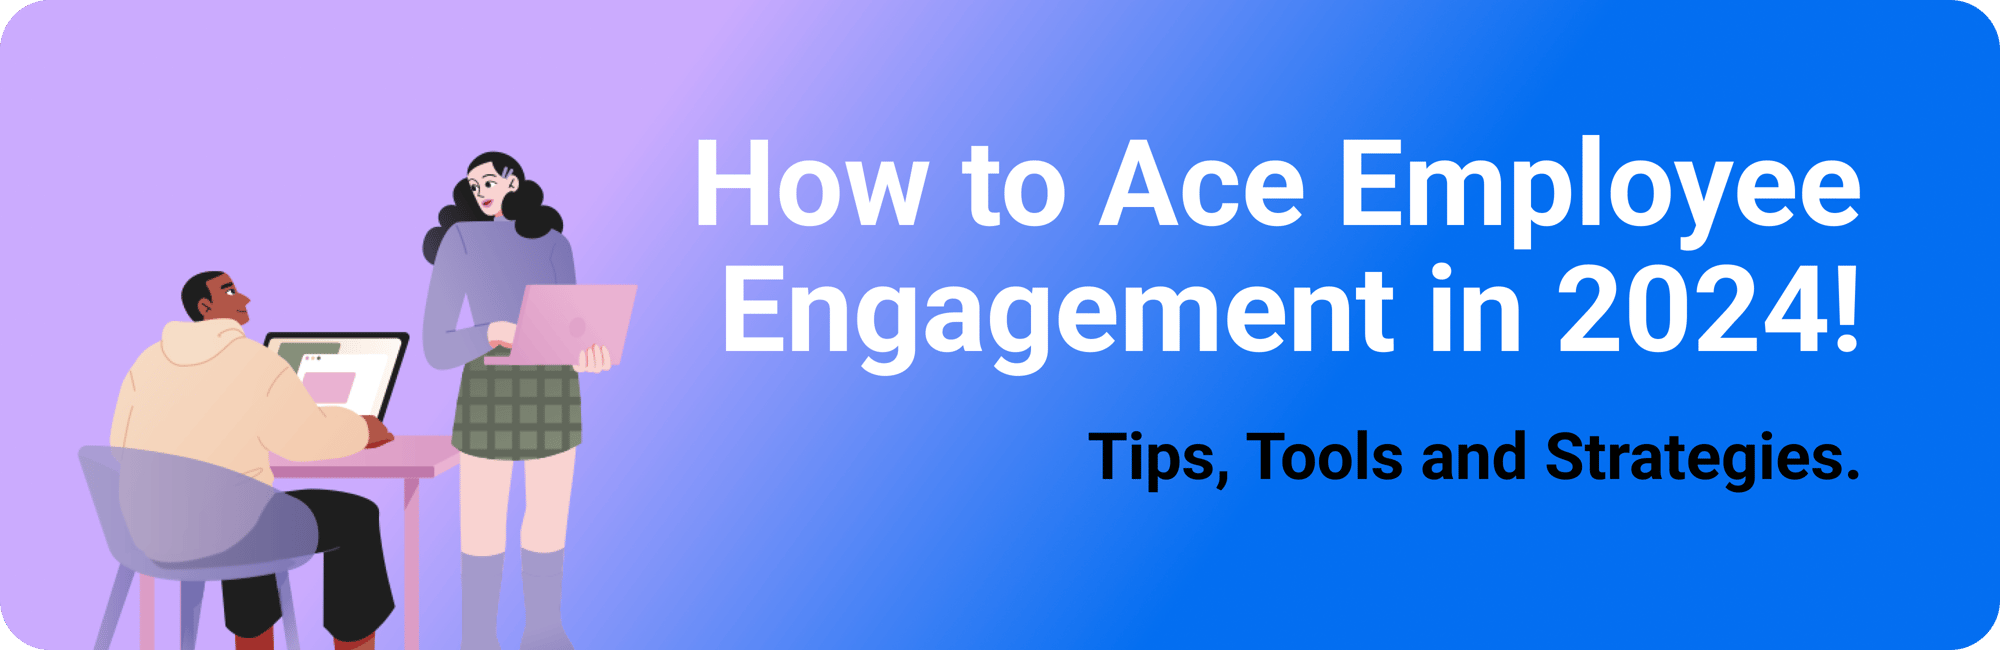 How To Ace Employee Engagement in 2024